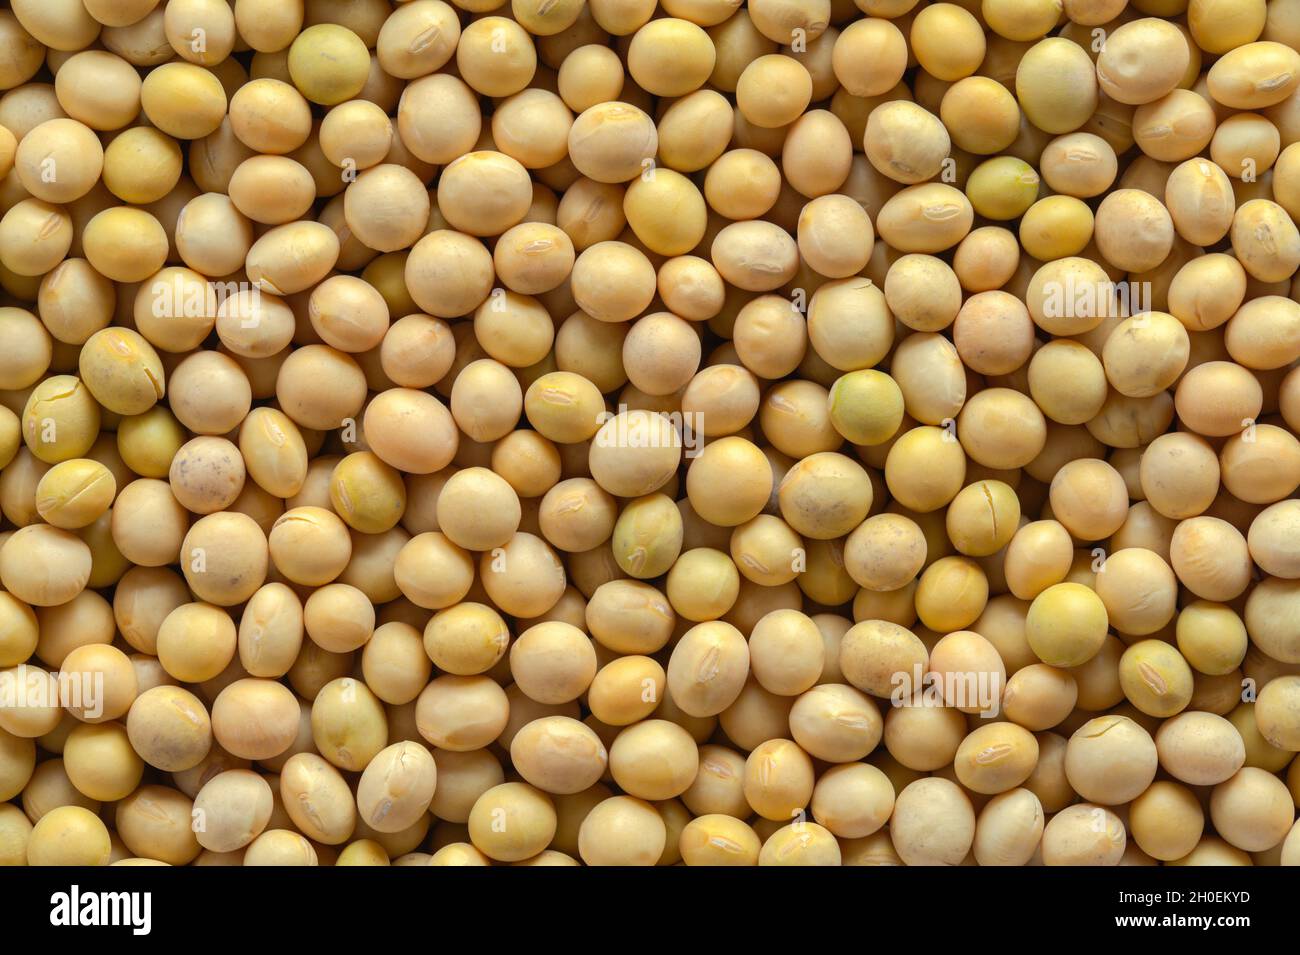 Pile of Soy Beans Background Texture Close Up. Stock Photo